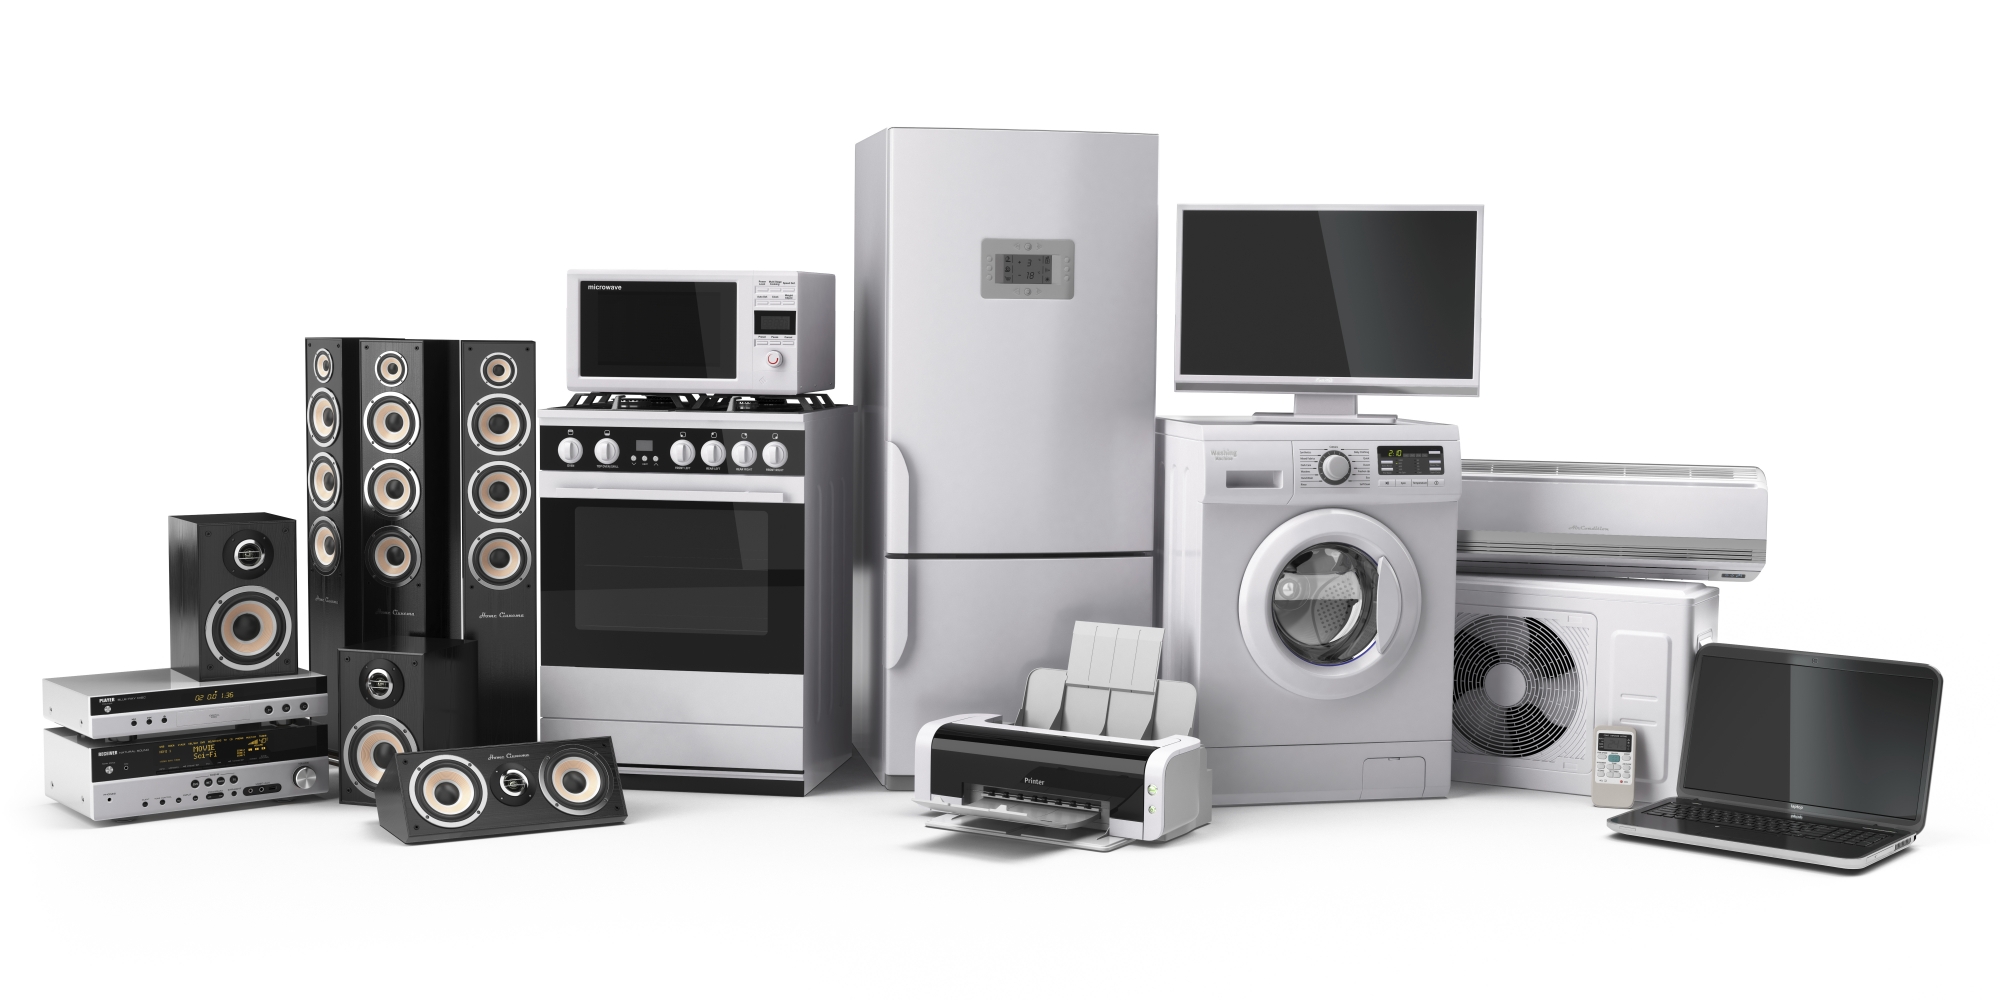 Appliance Removal & Disposal